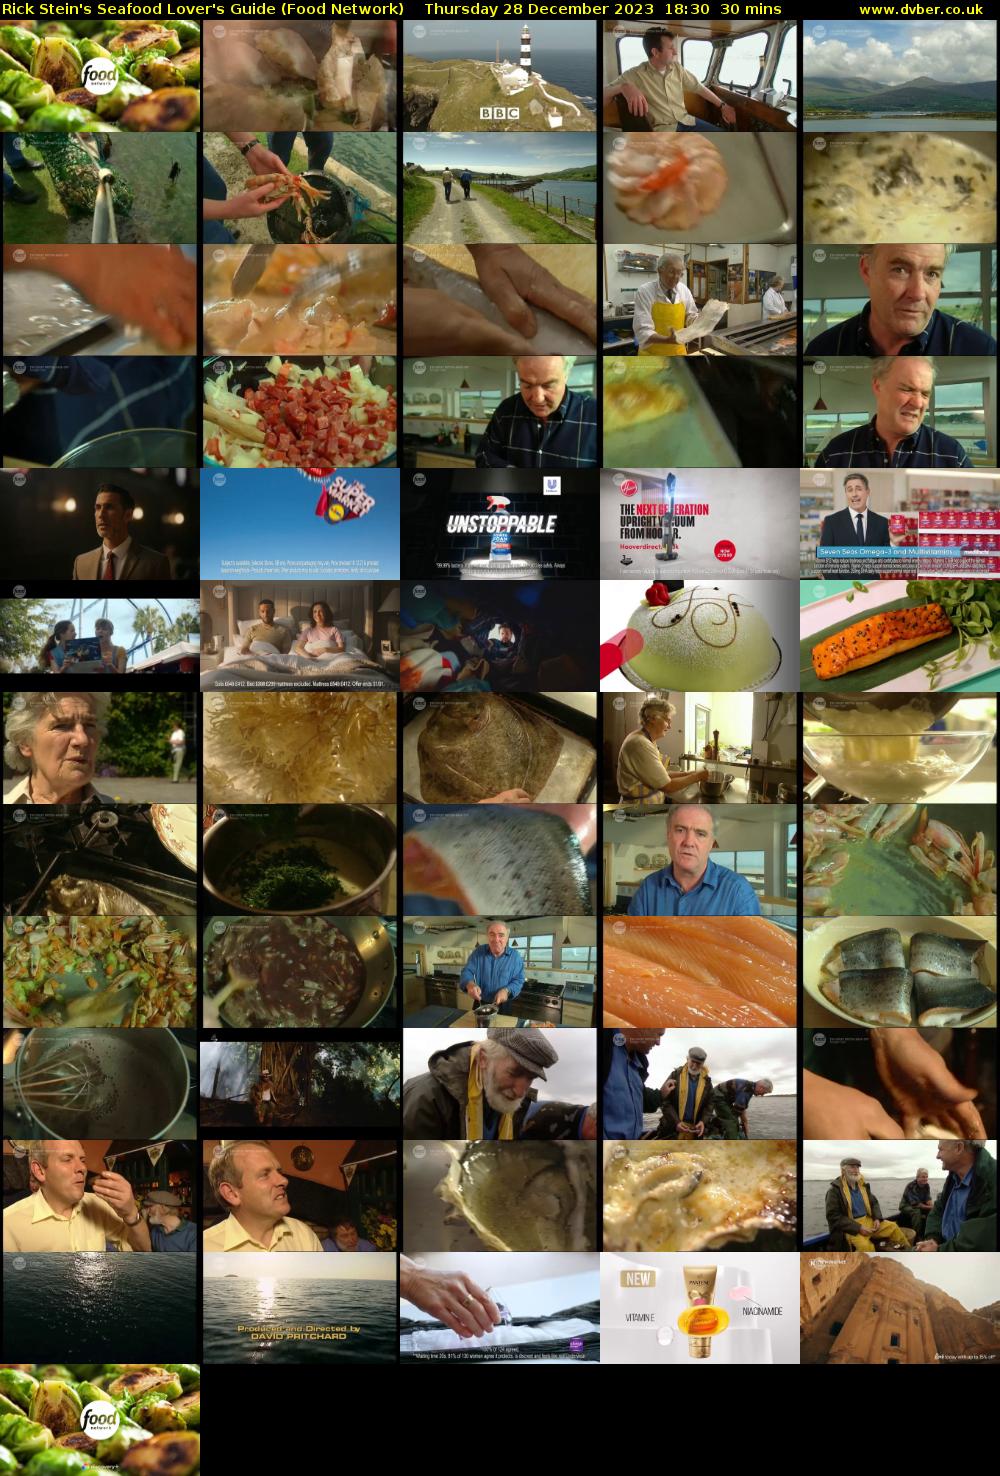 Rick Stein's Seafood Lover's Guide (Food Network) Thursday 28 December 2023 18:30 - 19:00